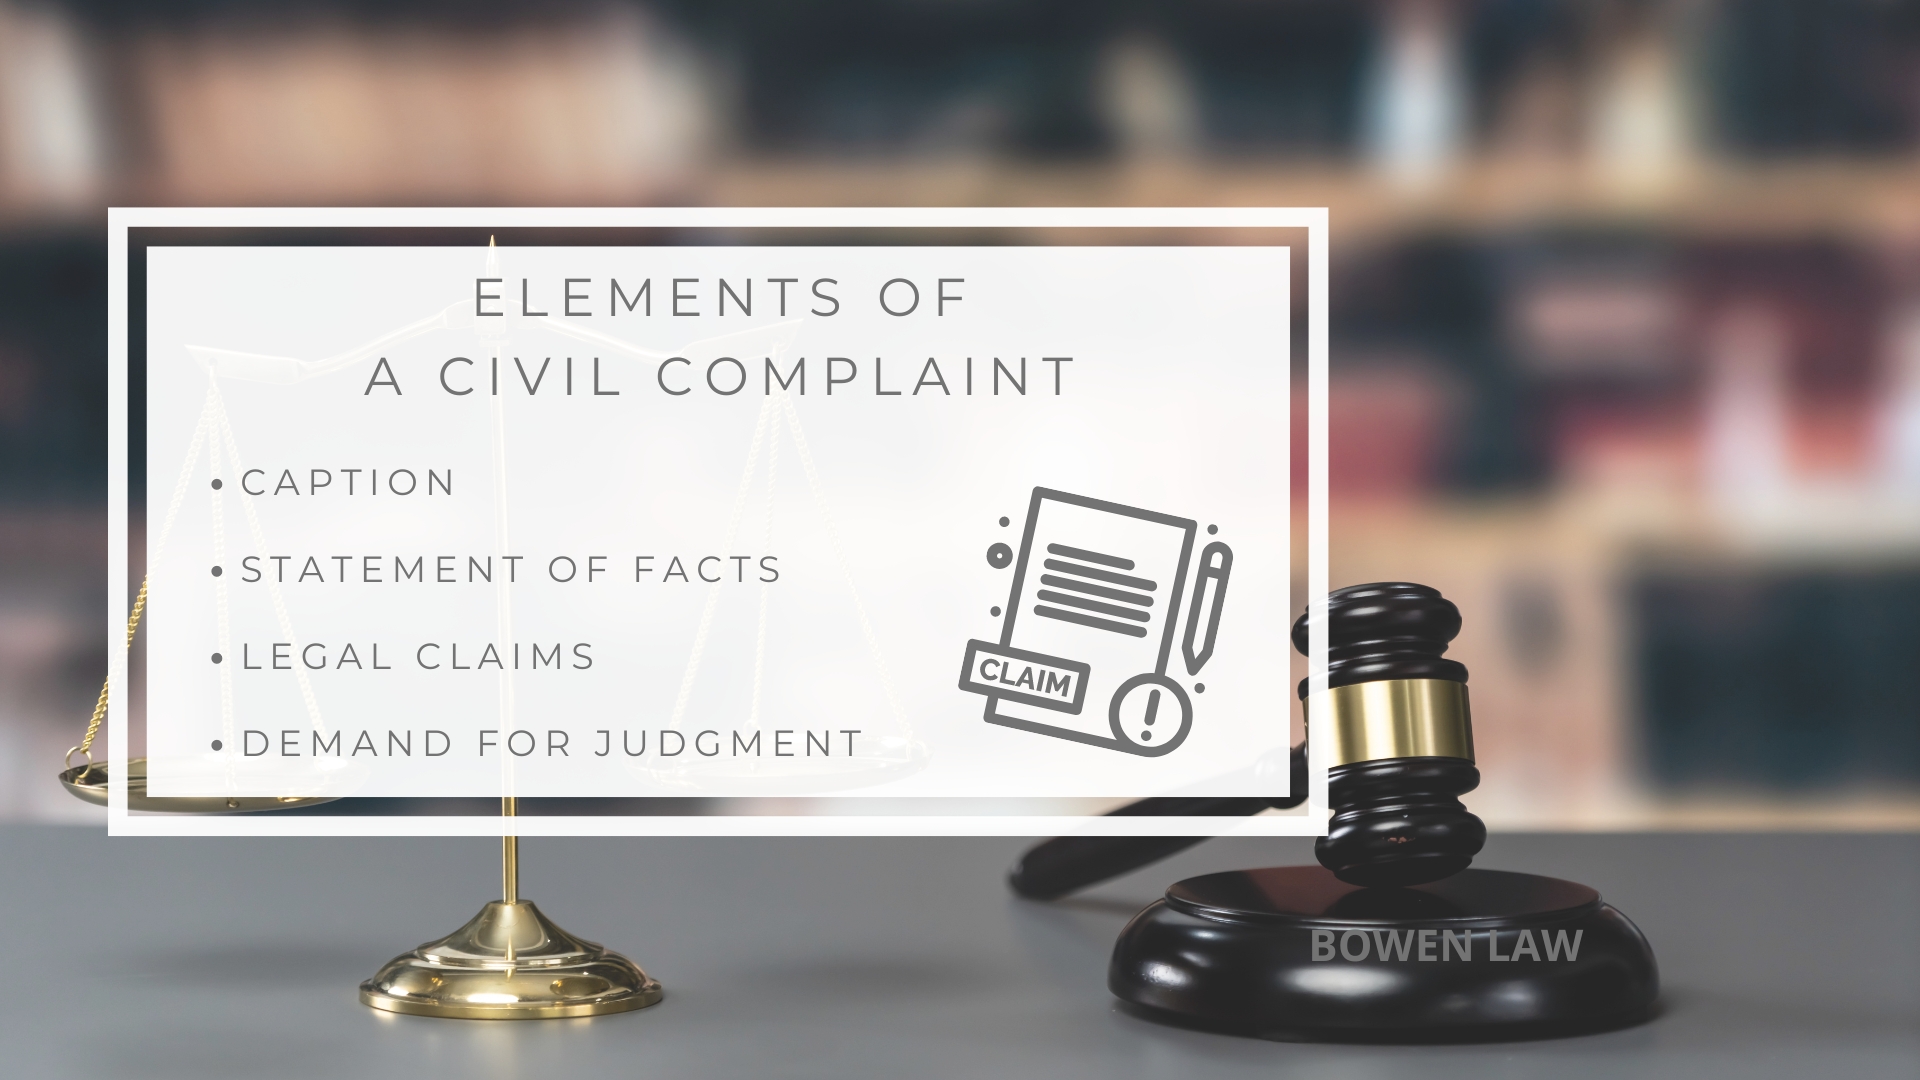 Infographic image of elements of a civil complaint